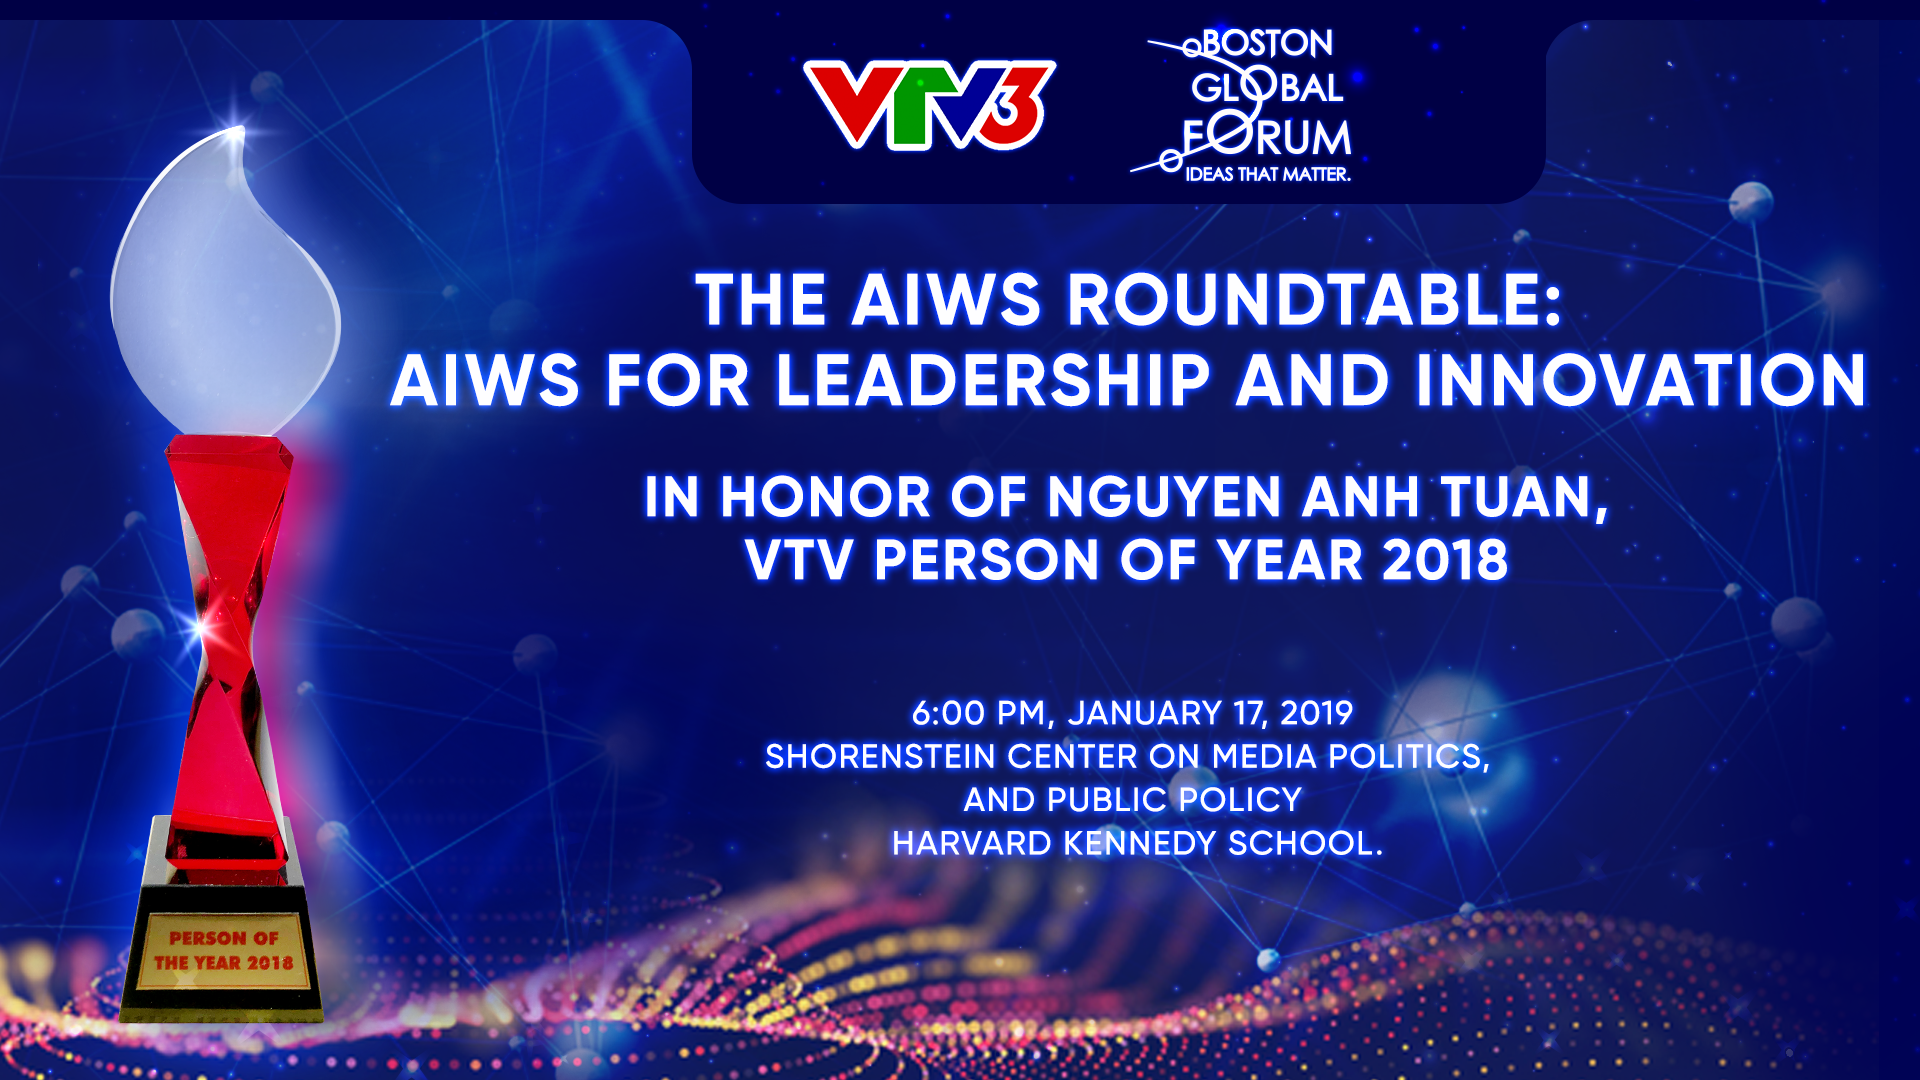 AIWS Roundtable discussed on AIWS and honored Nguyen Anh Tuan as VTV Person of Year 2018